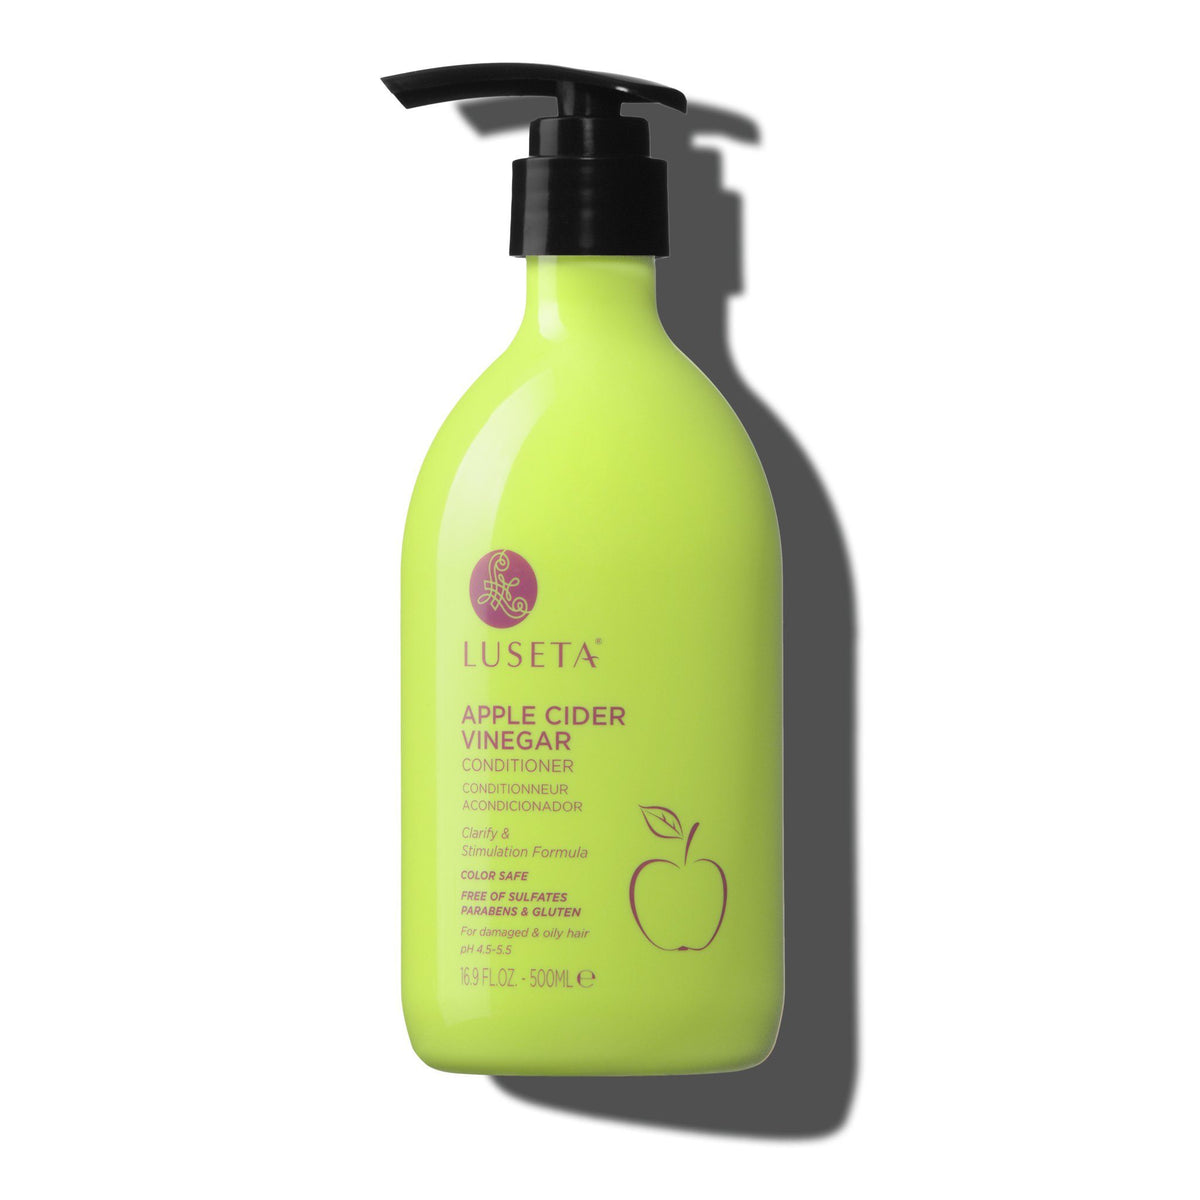 Apple Cider Vinegar Conditioner - 16.9oz - by Luseta Beauty |ProCare Outlet|